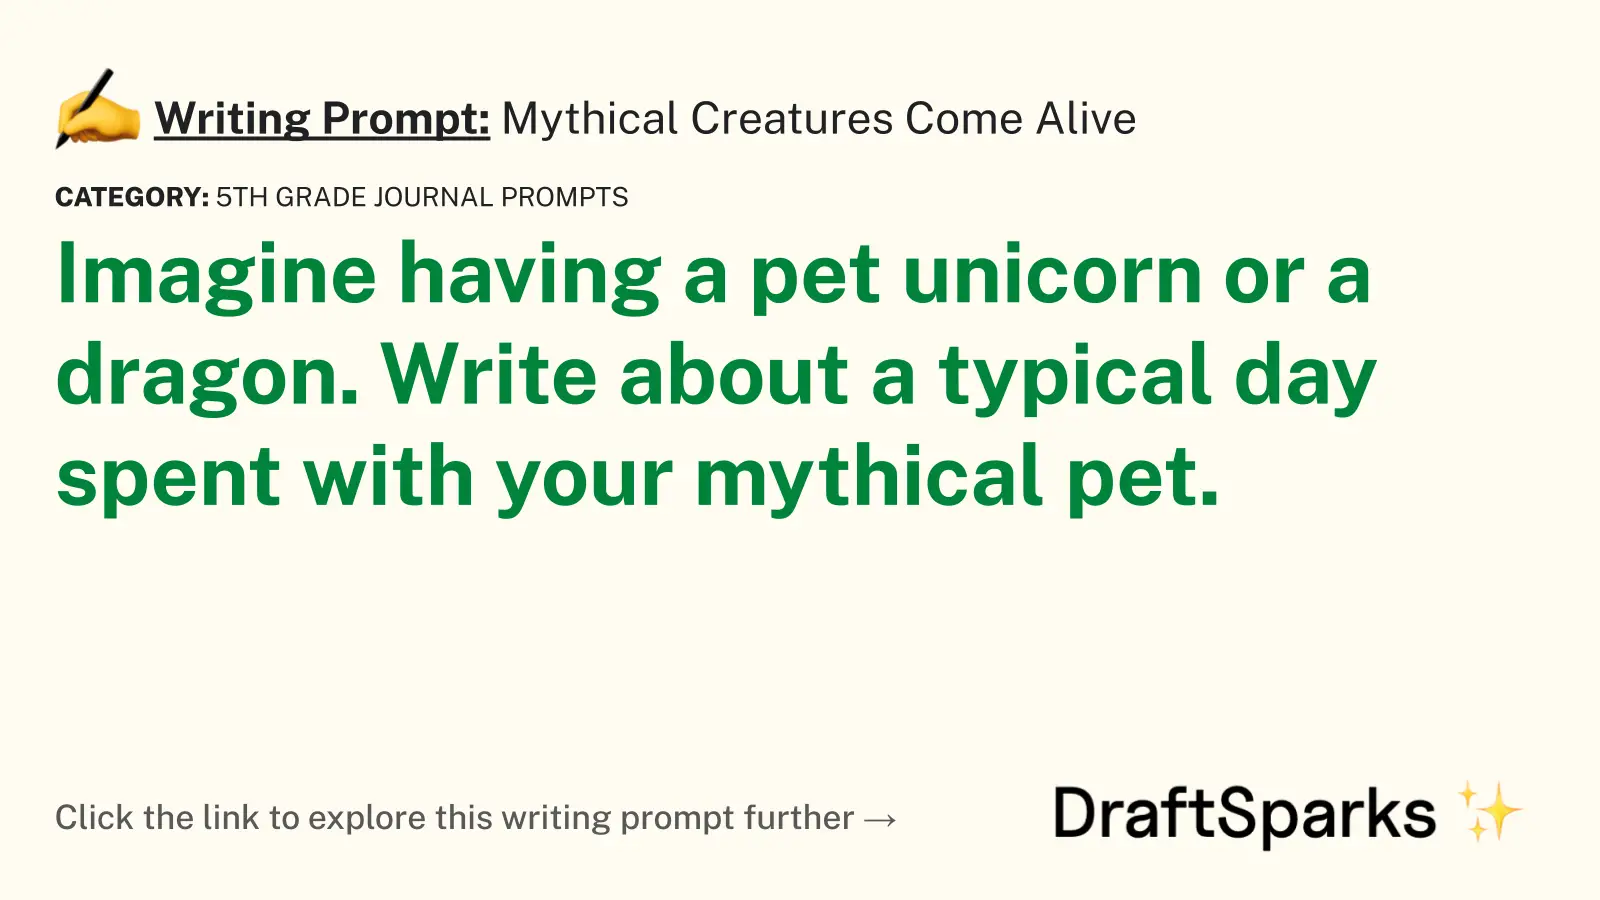 Mythical Creatures Come Alive